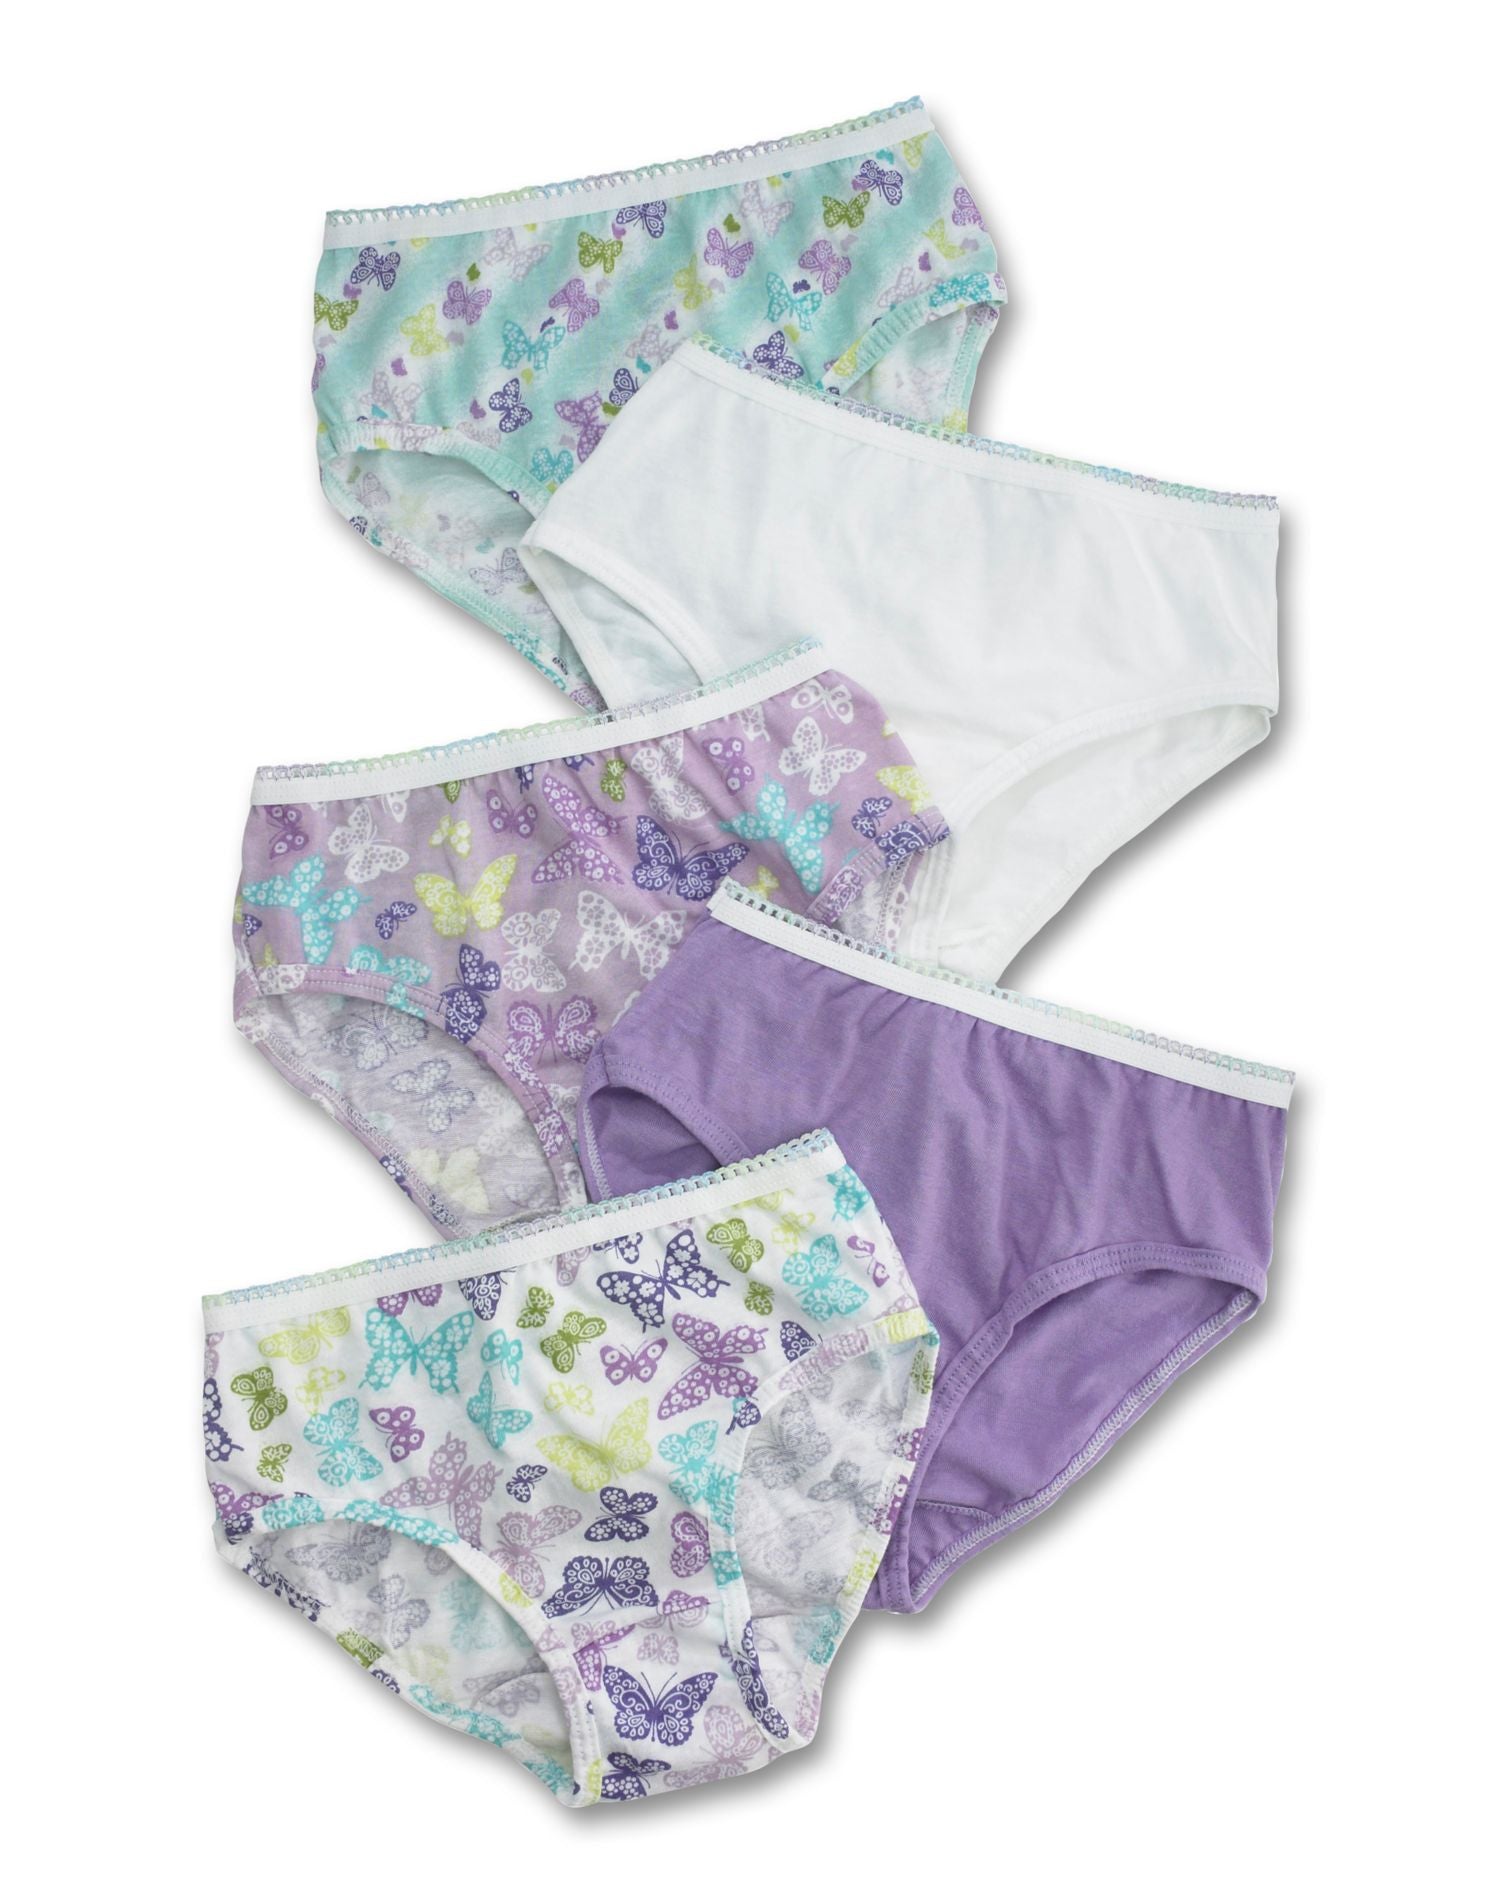 Hanes Girls' No Ride Up Cotton Colored Briefs 9-Pack, Butterfly Floral,  Size - 12